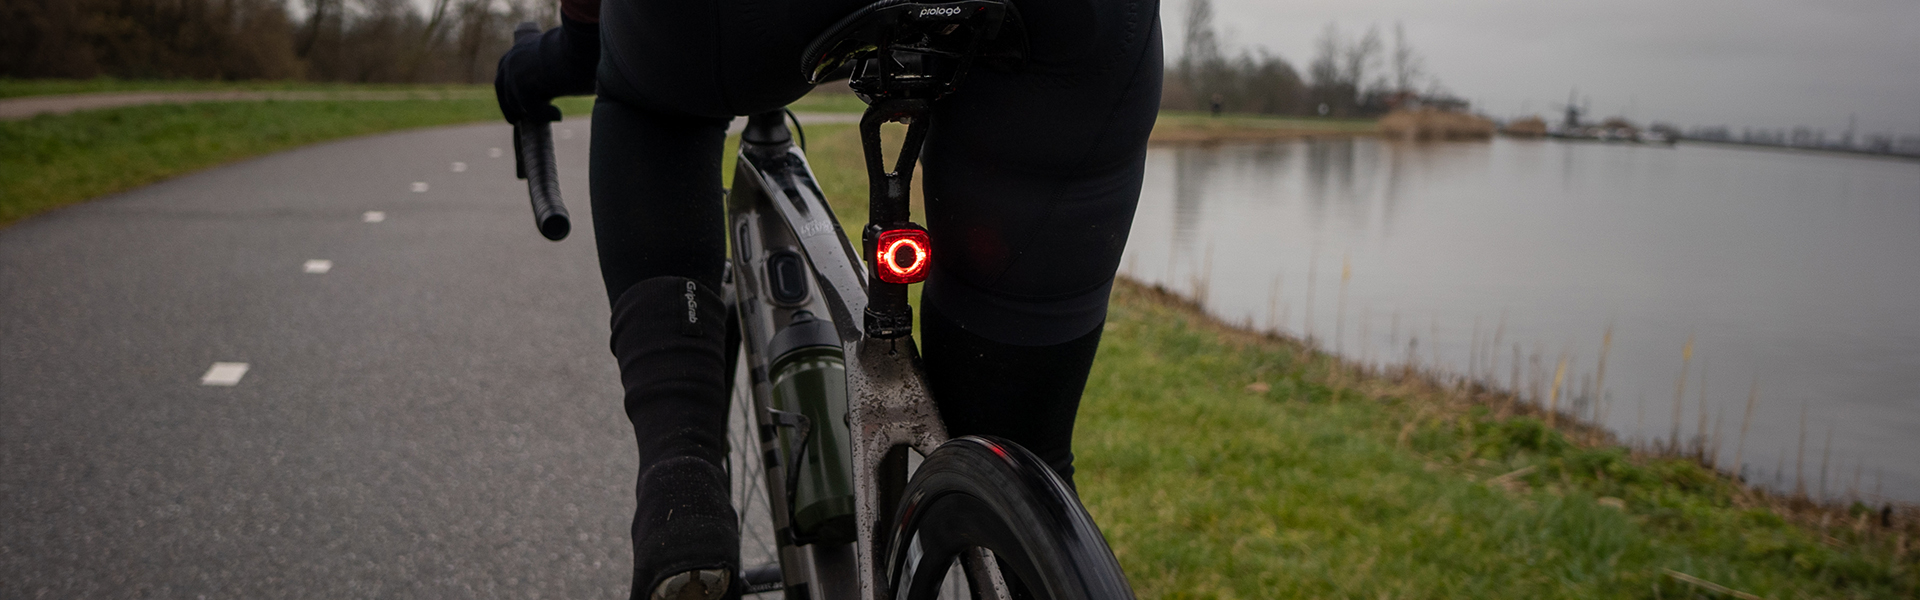 Sate-lite CREE ebike light ISO6742-1 AS GB BS eletric bike tail light with ECE reflector mount on rear render